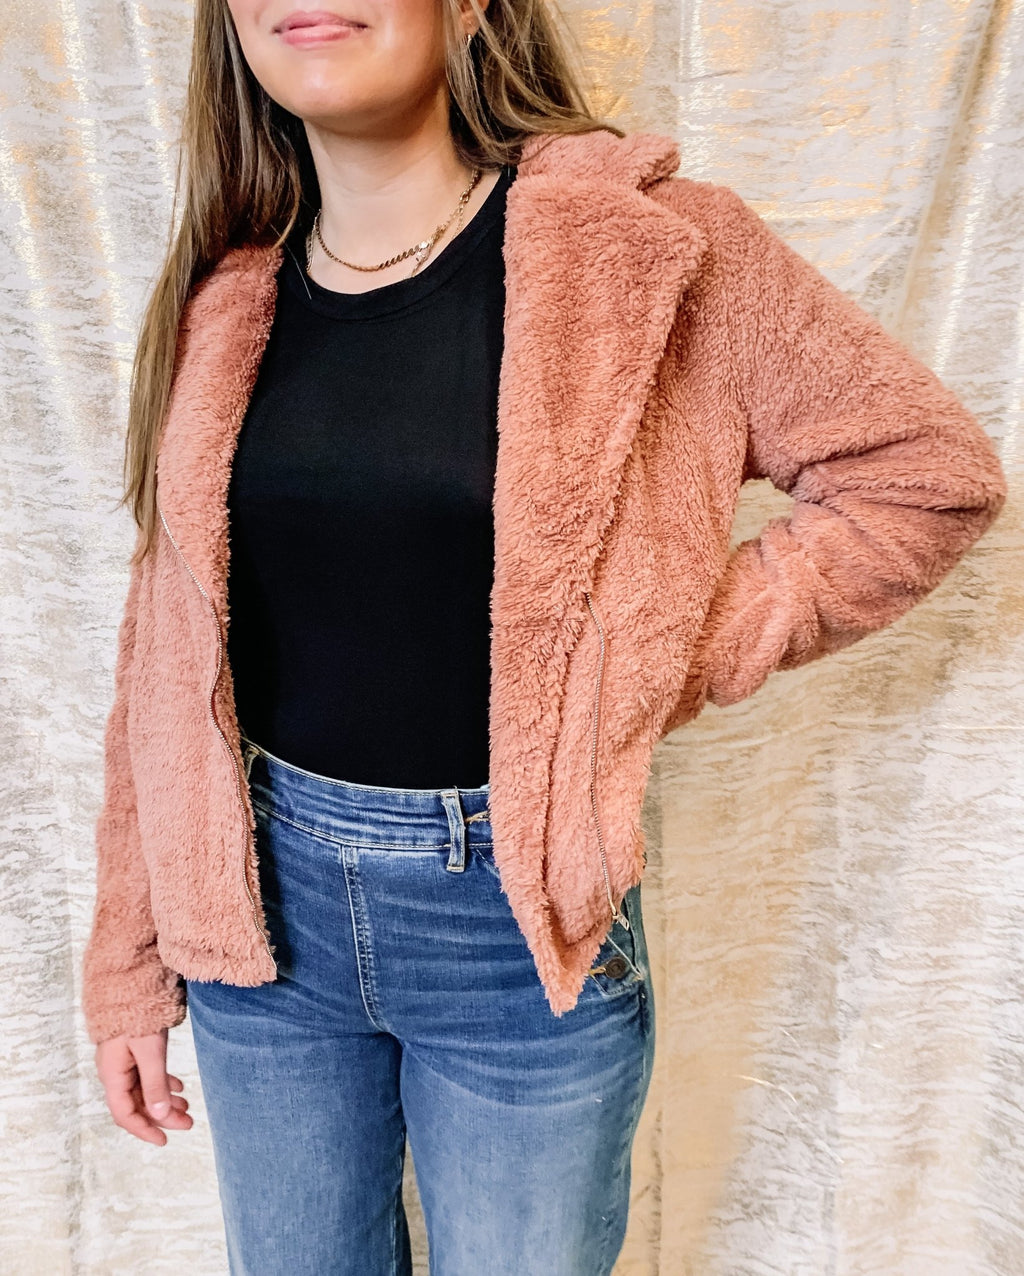 The Cara Jacket - Luca Hill Boutique 